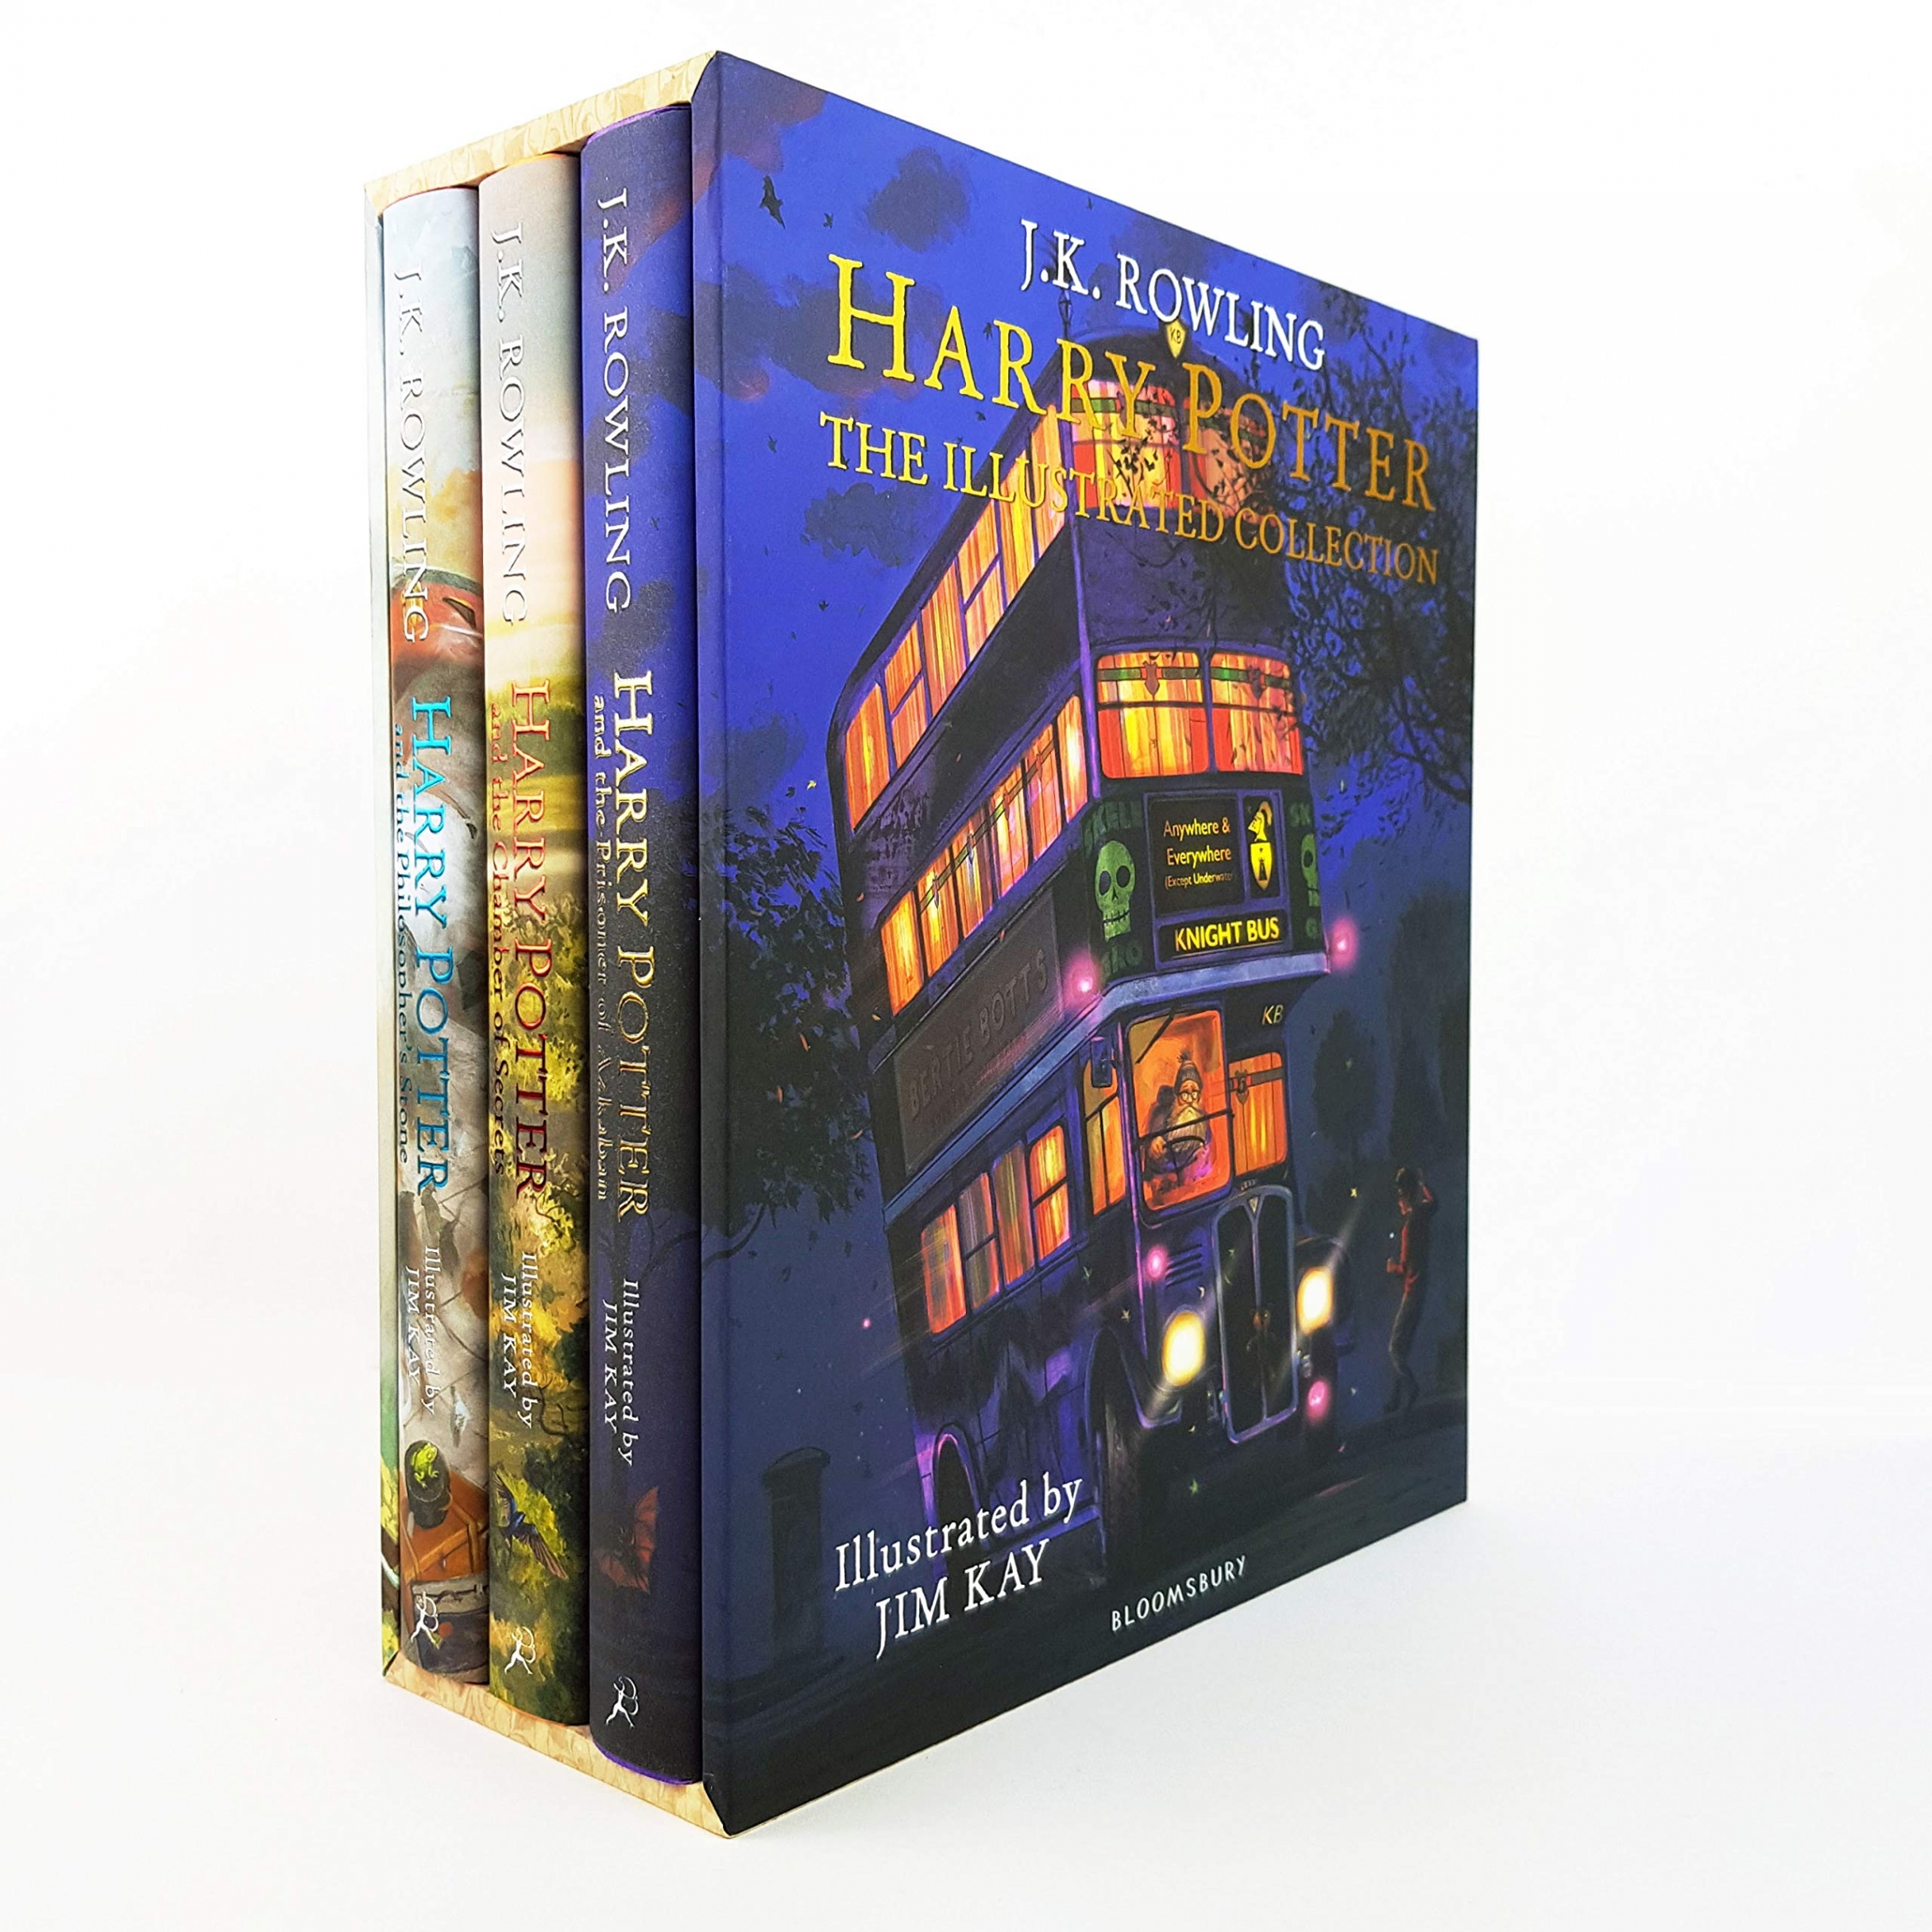 Rowling J.K. Harry Potter - The Illustrated Collection (3-book box set) 